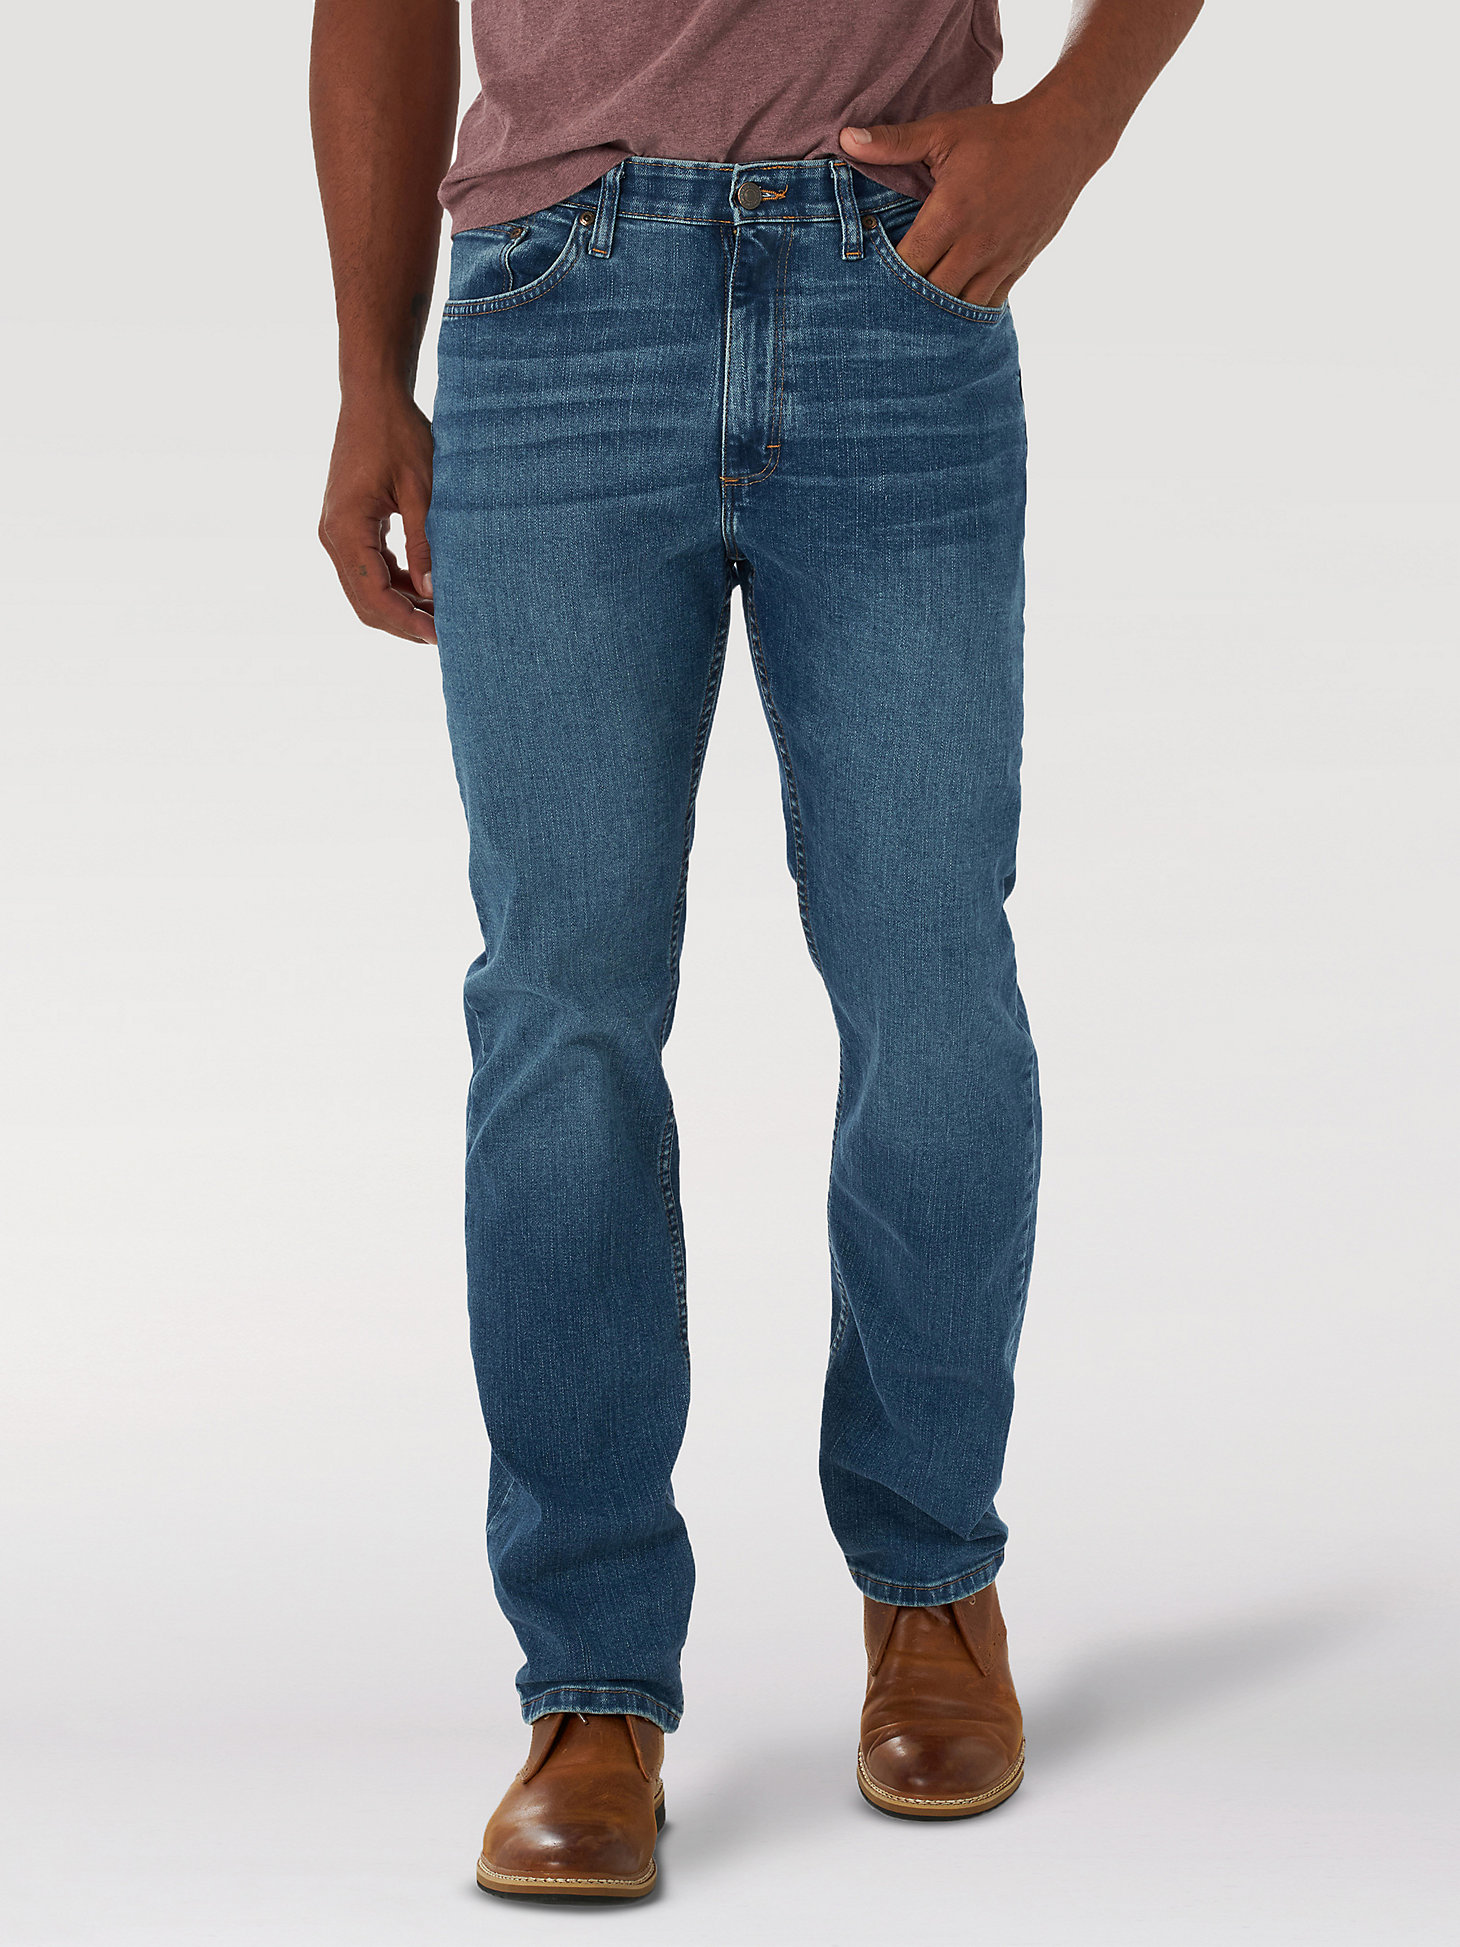 Men's Wrangler® Five Star Weather Anything Regular Fit Jean in Lennox main view